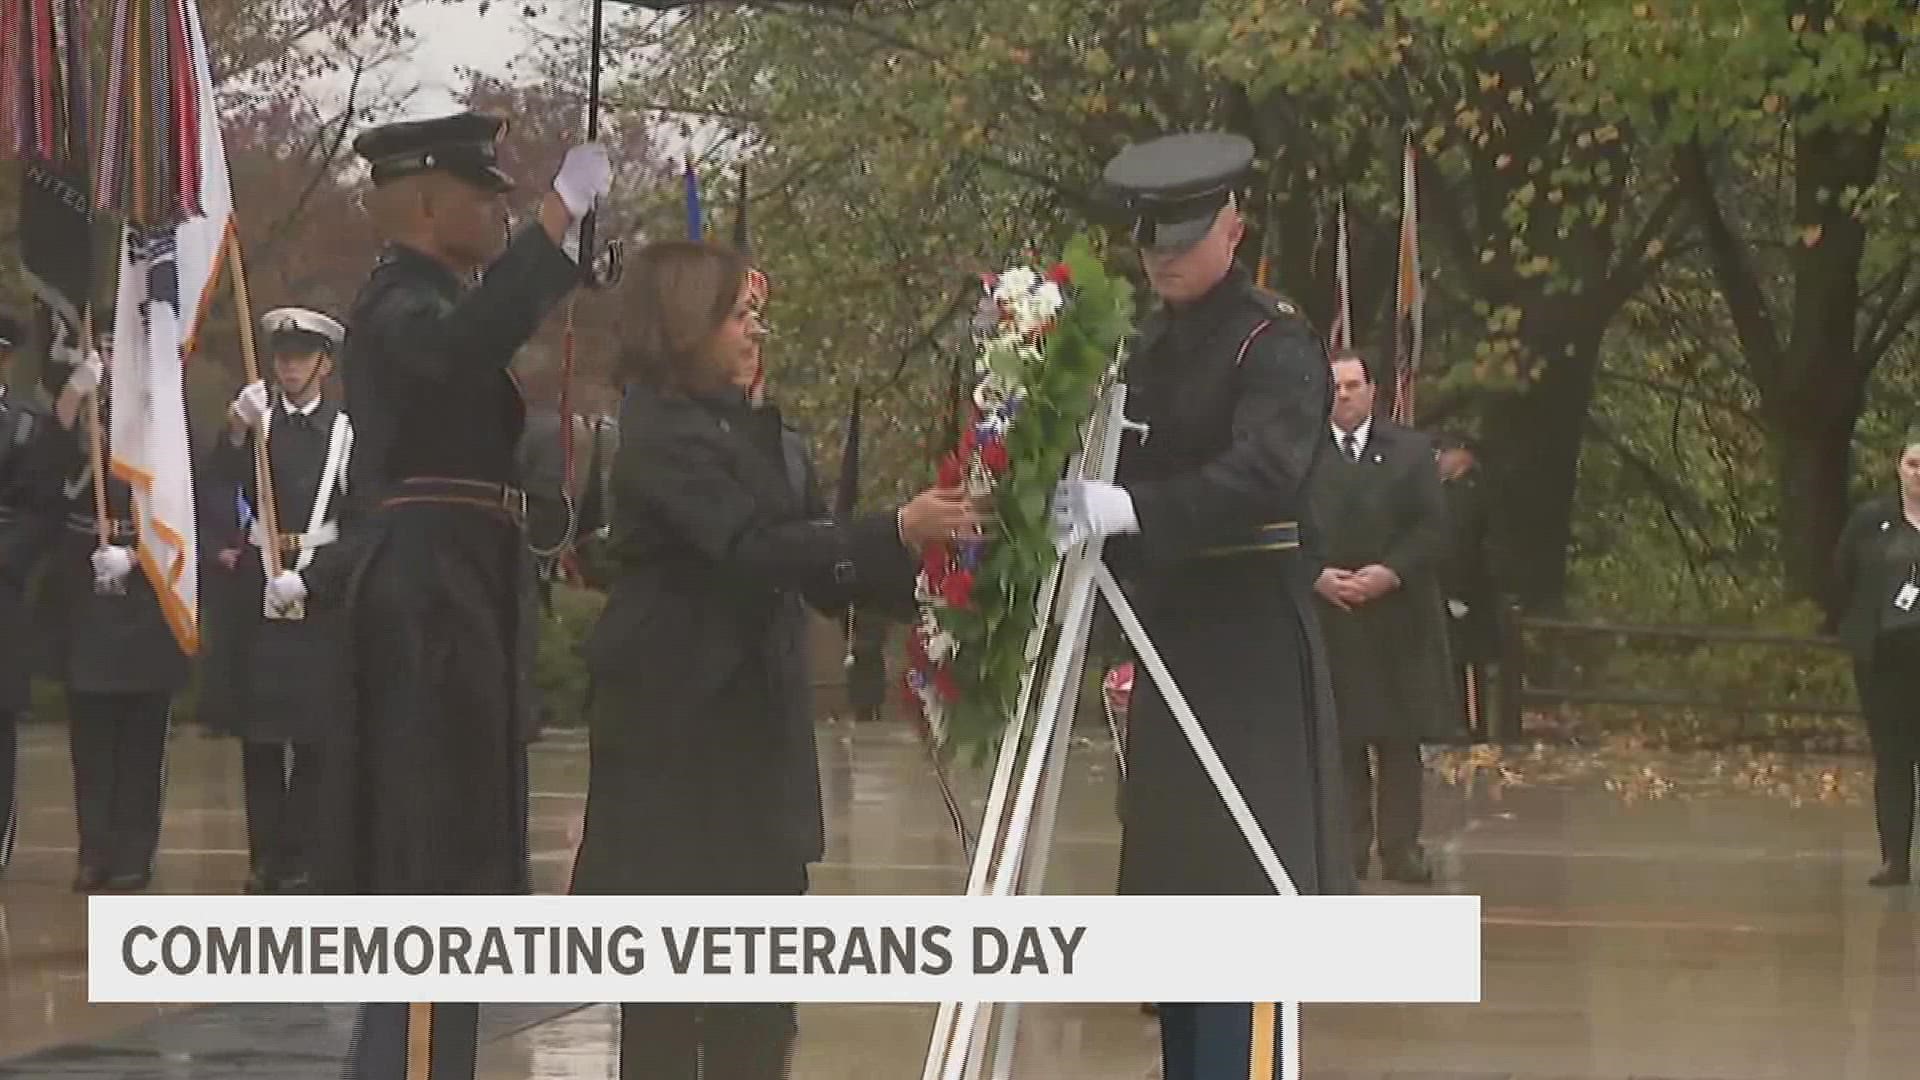 Under gray clouds and pouring rain at Arlington National Cemetery, Vice President Kamala Harris has told the nation's veterans their work makes America stronger.